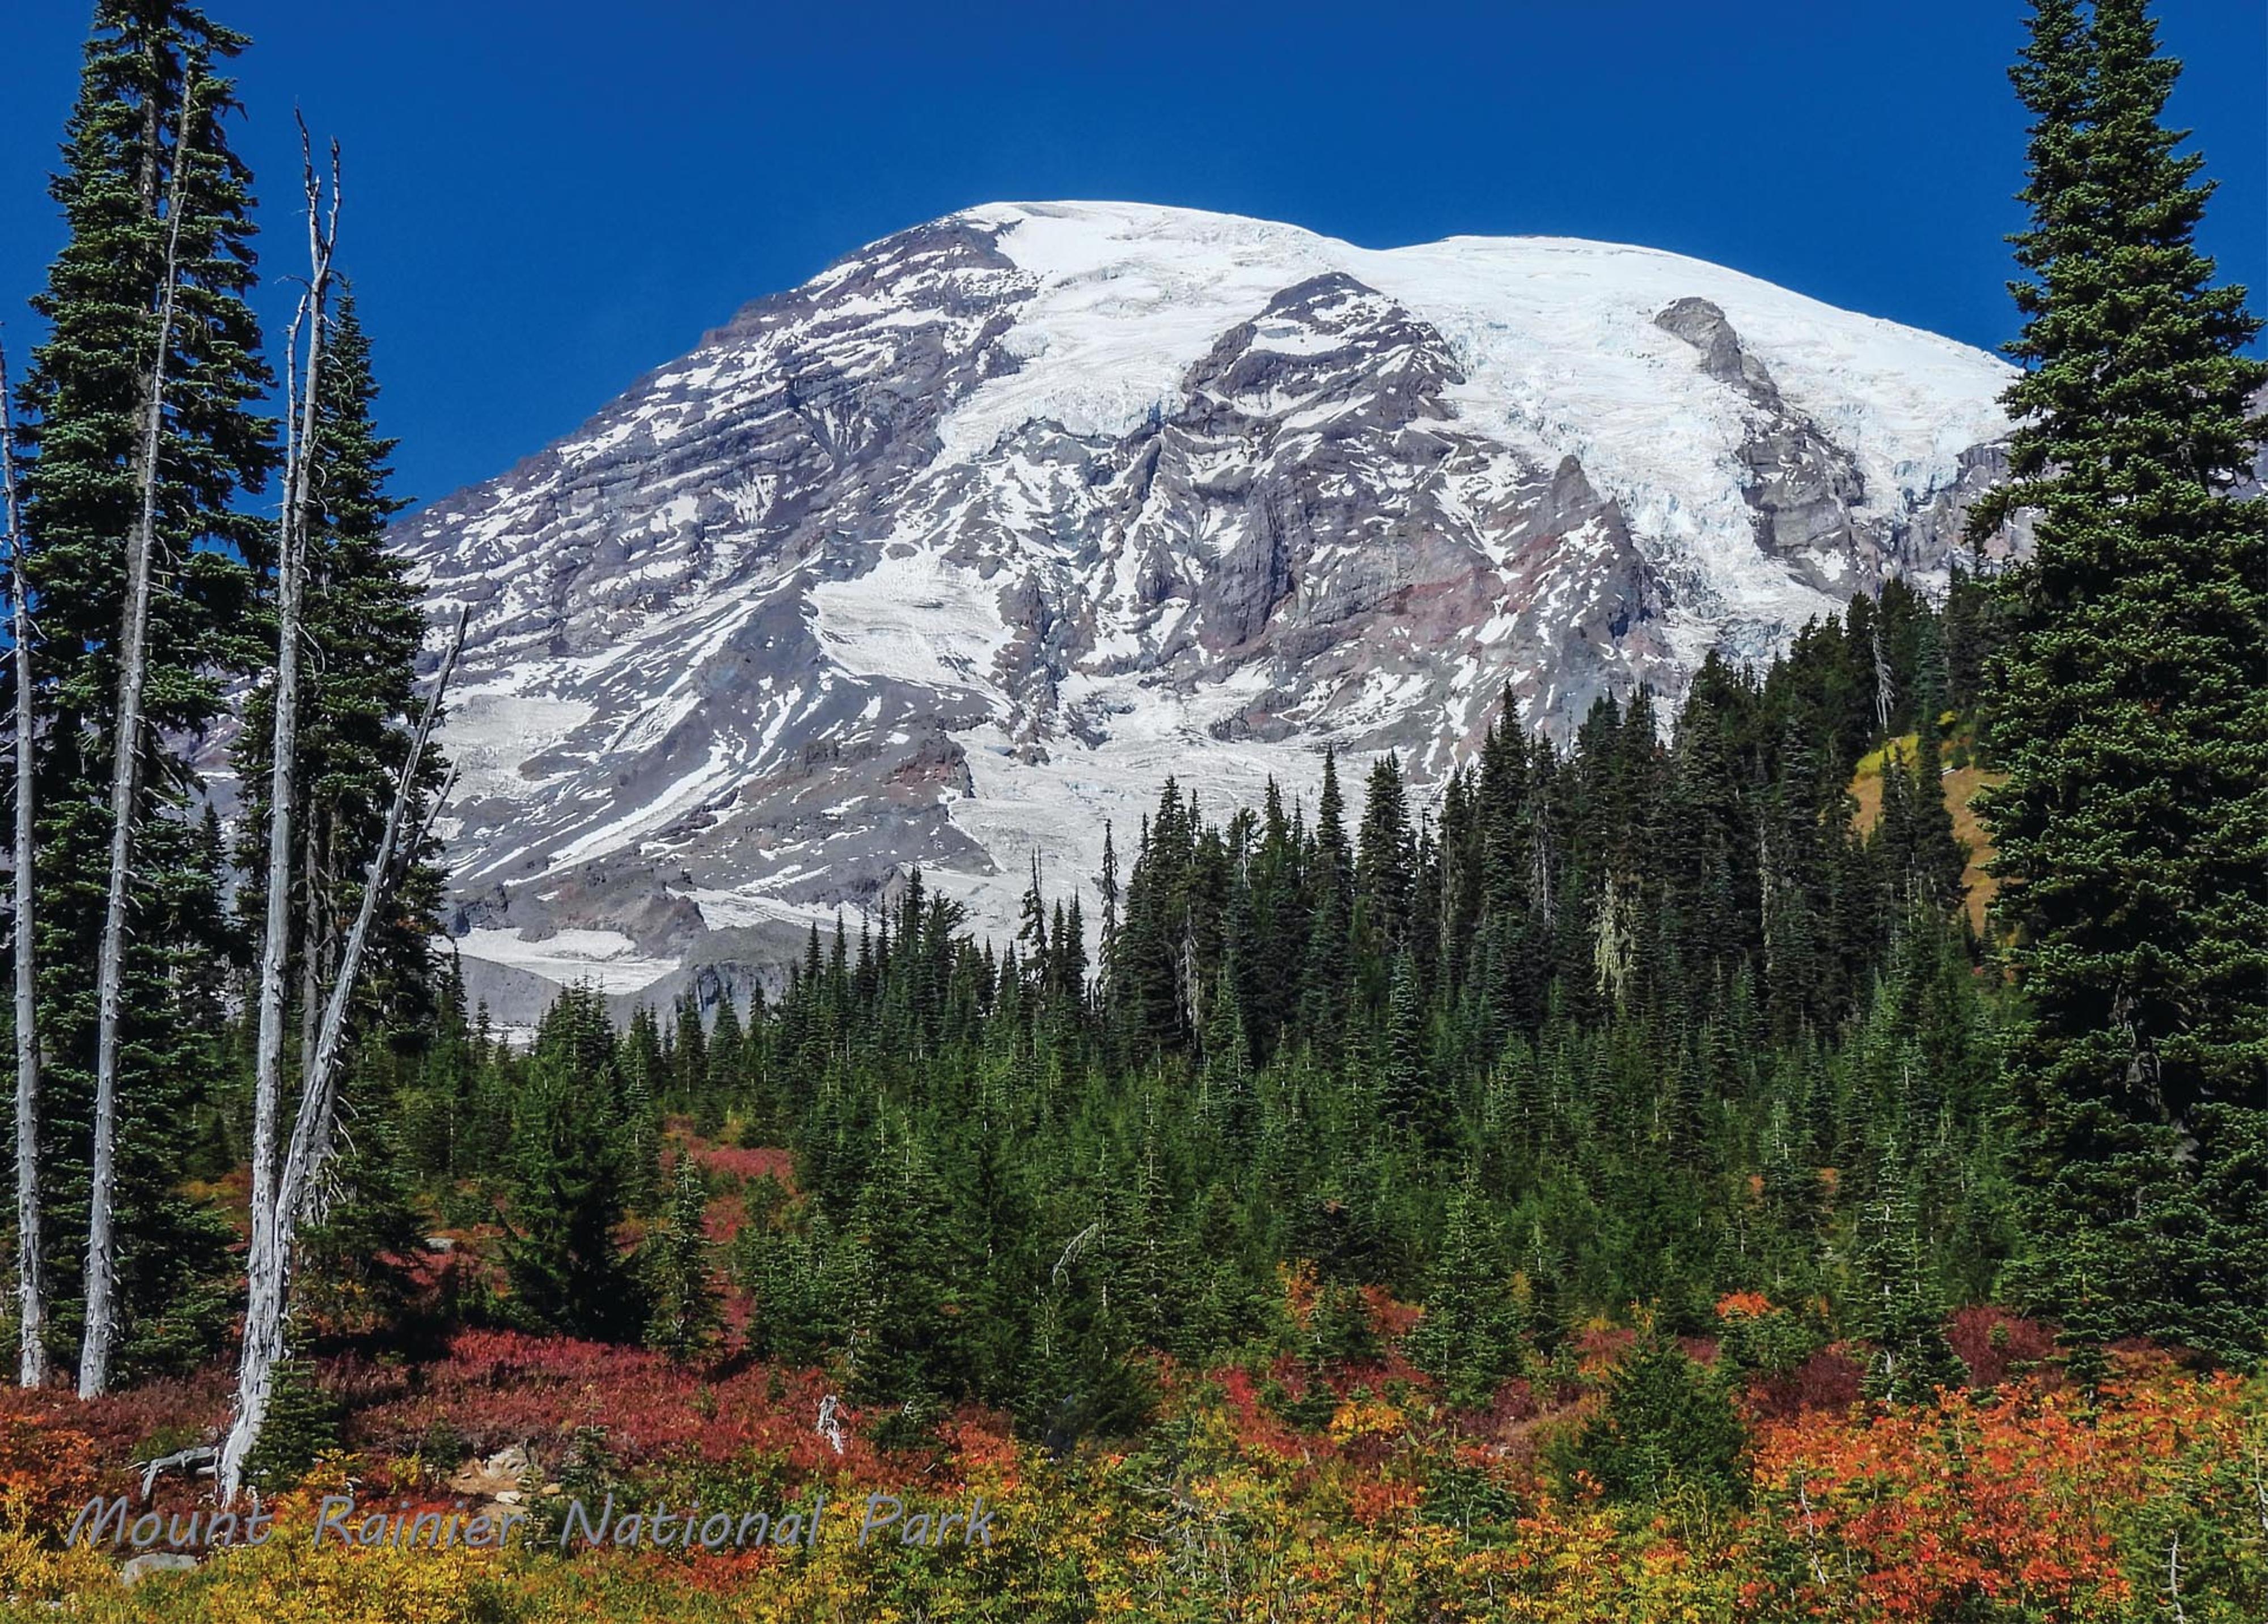 National Park Puzzles - Mount Rainer National Park Paradise in the Fall (1000 pc)